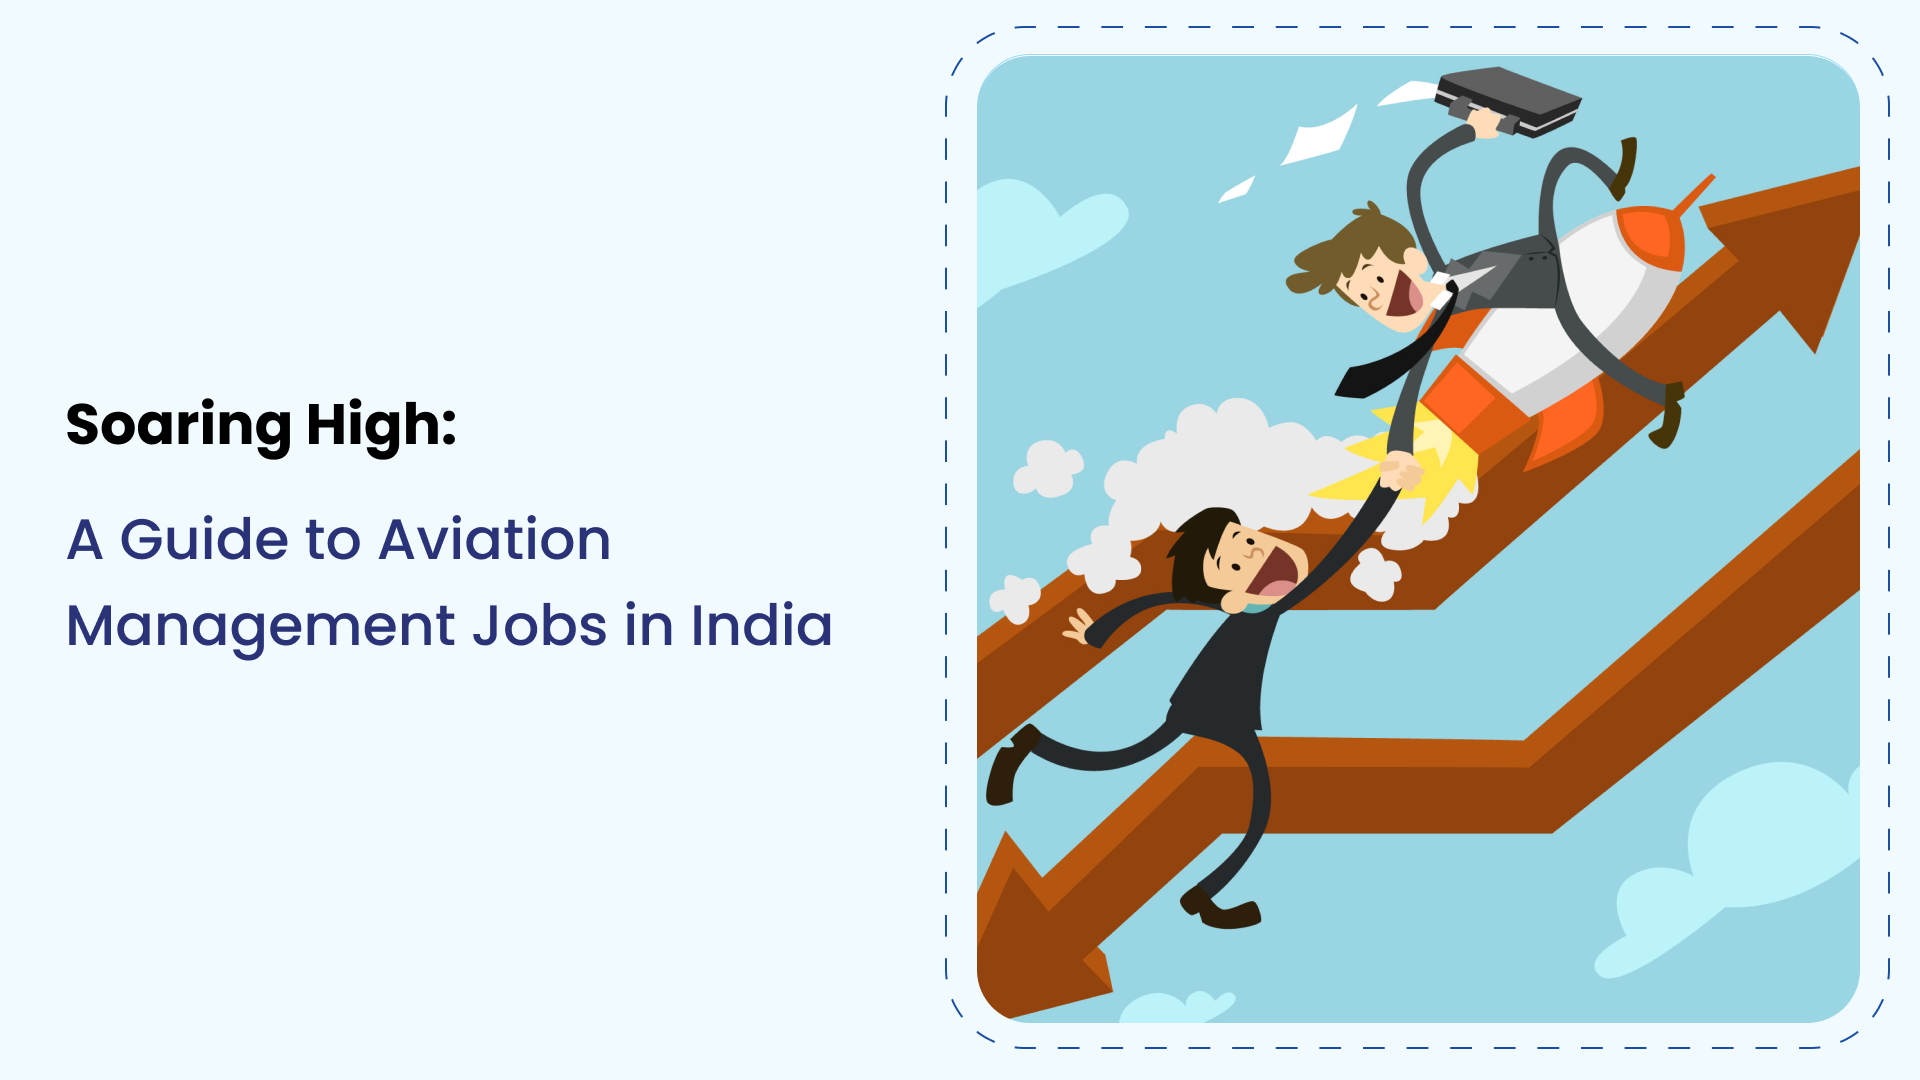 Soaring High: A Guide to Aviation Management Jobs in India